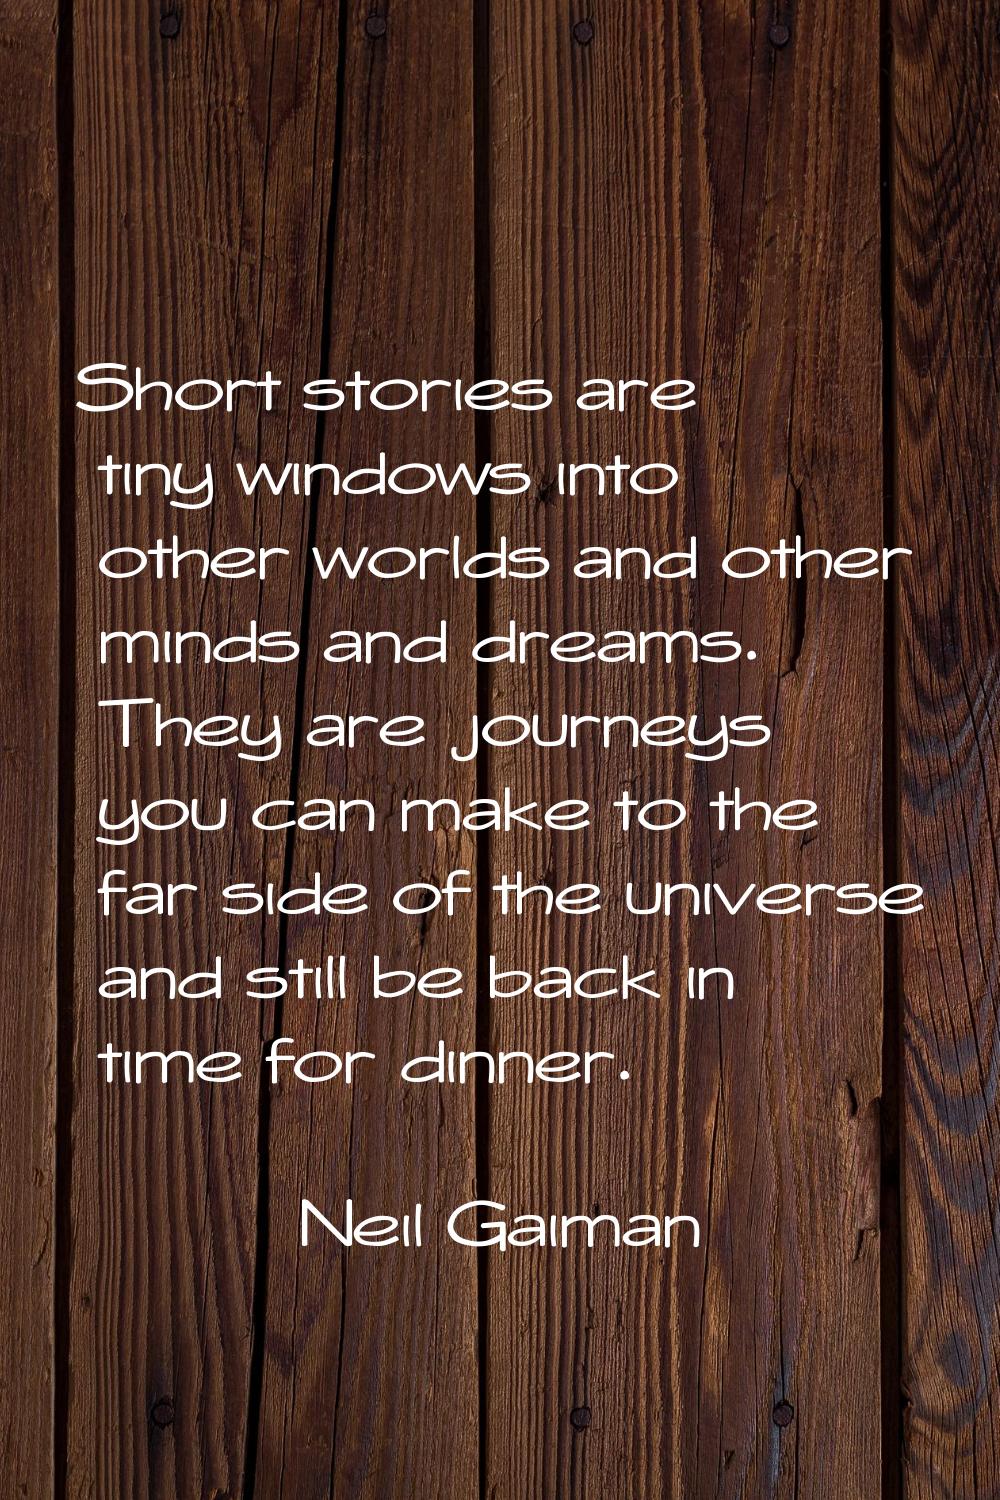 Short stories are tiny windows into other worlds and other minds and dreams. They are journeys you 